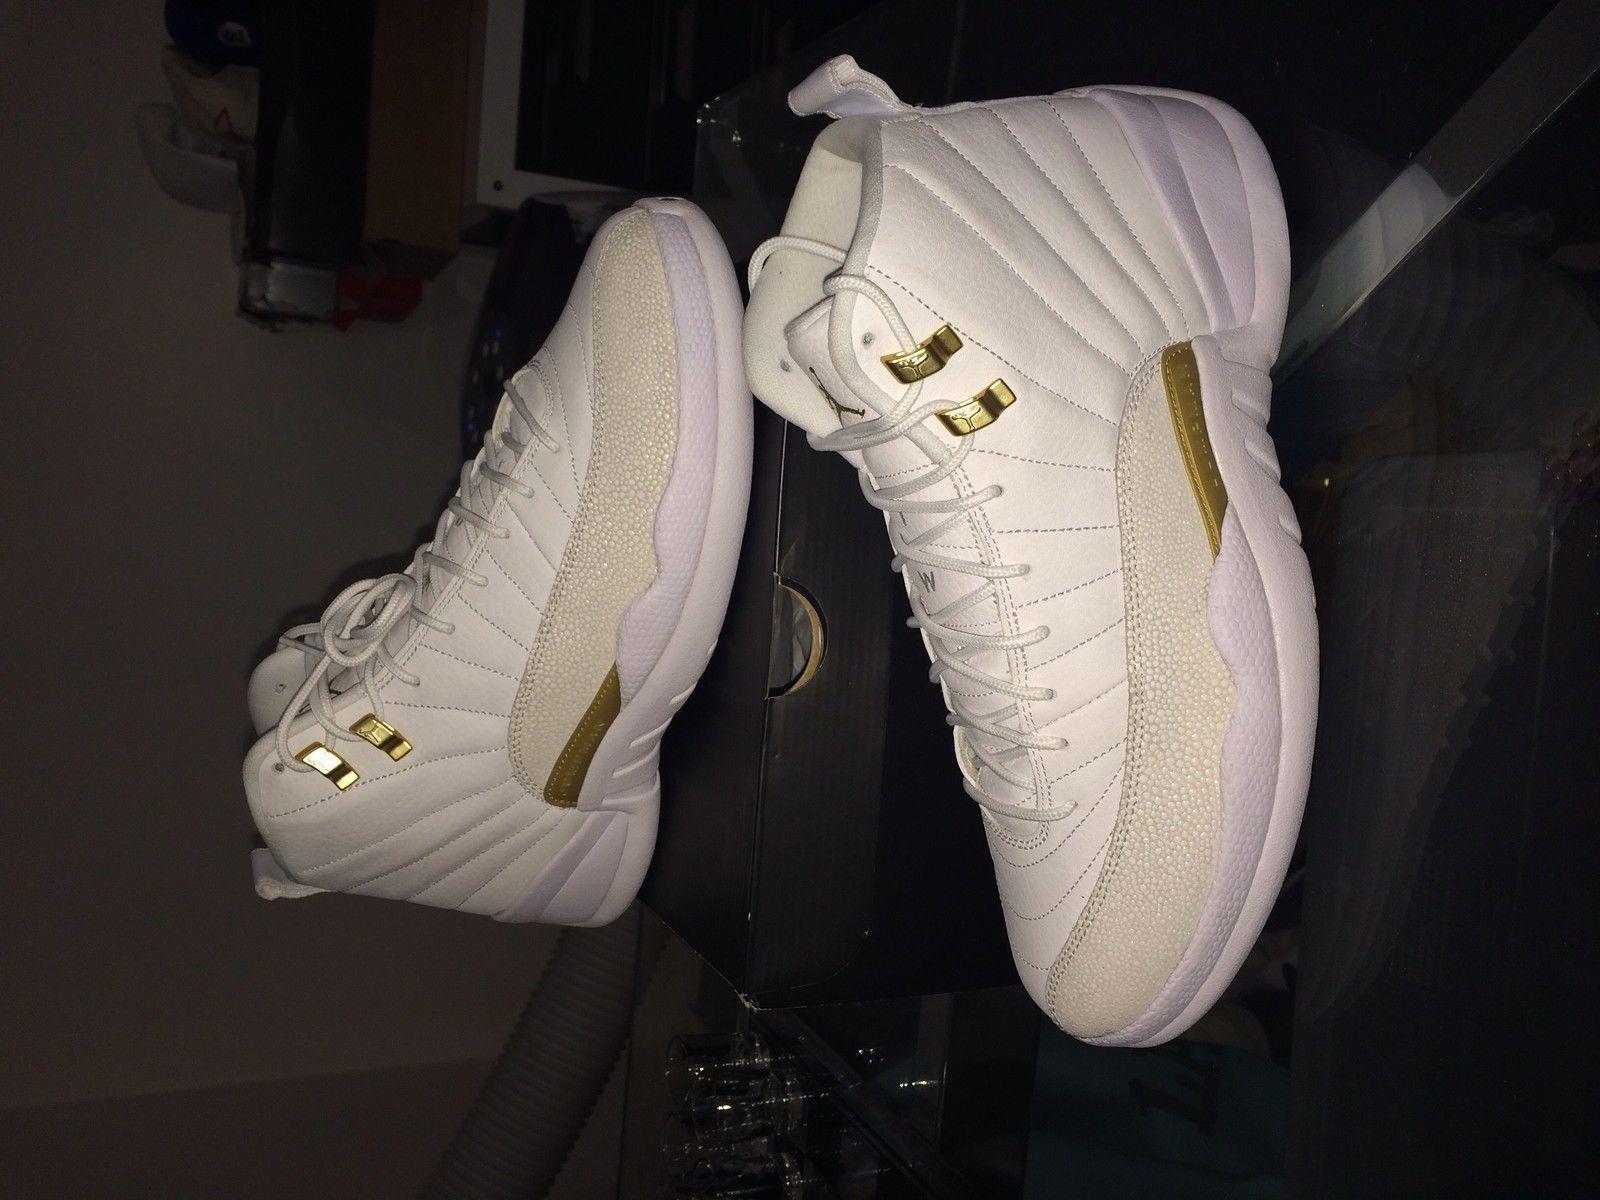 Authentic Air Jordan 12 OVO White And Gold Release Date Sale $168